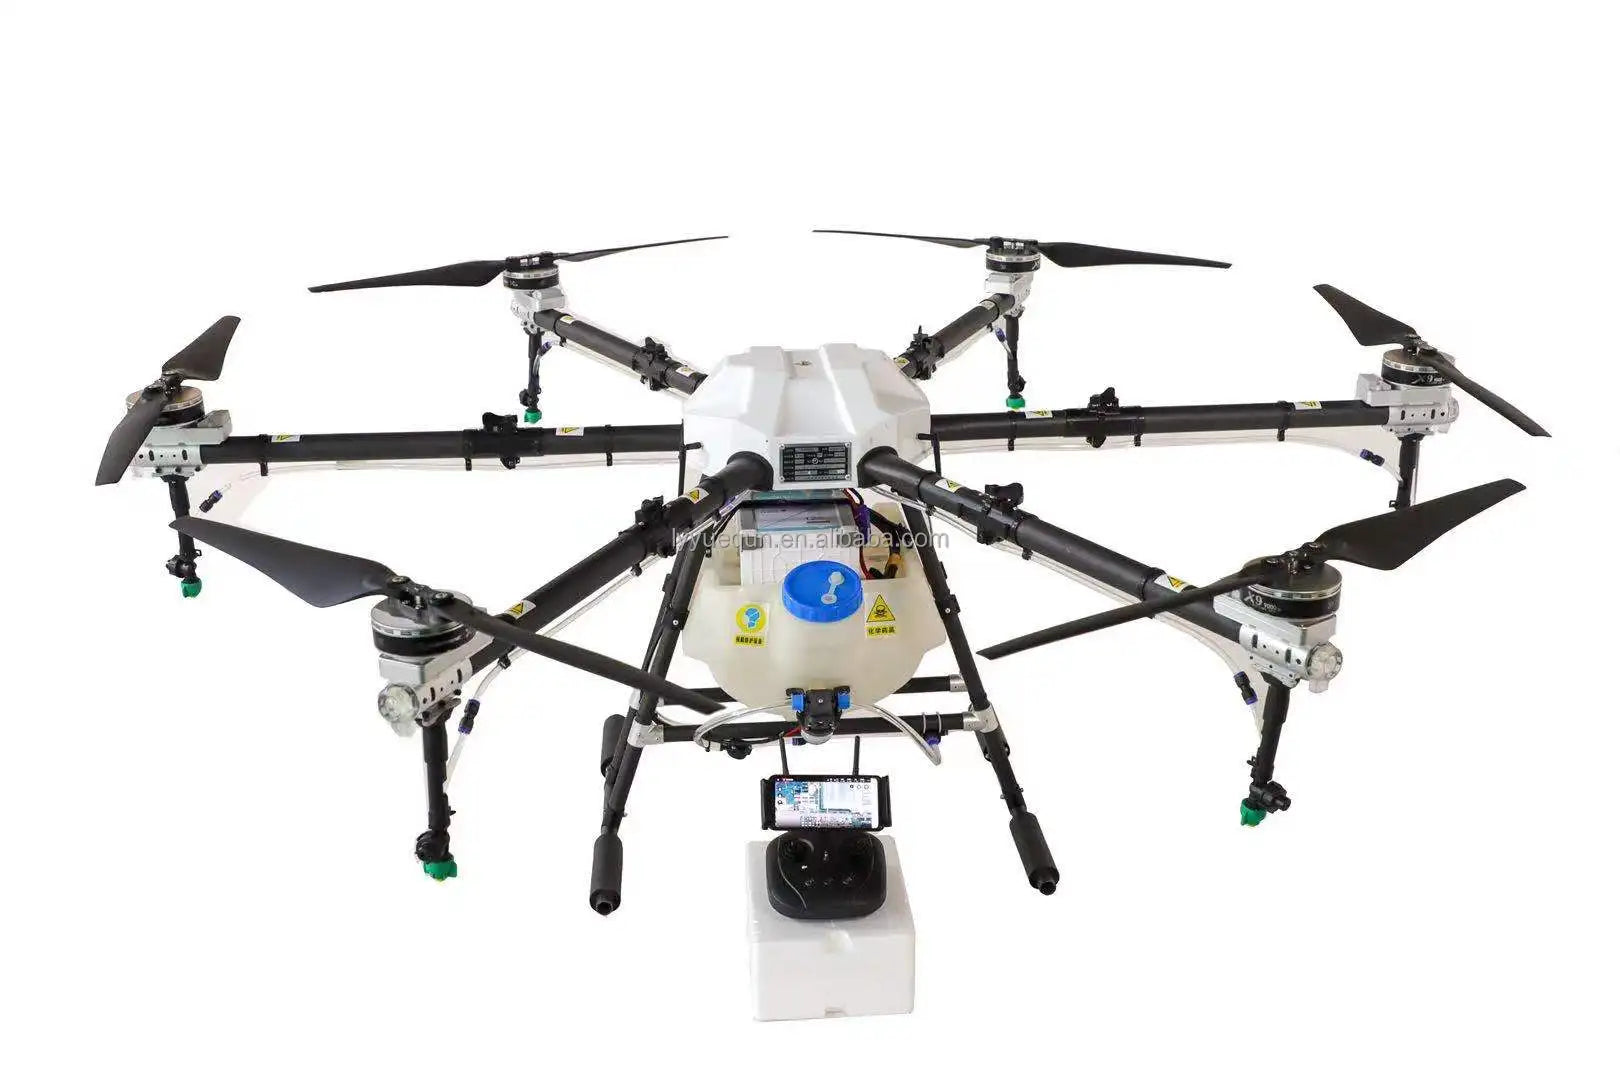 YUEQUN 3WWDZ-30A 30L Agriculture Drone, 4.A full-scale continuous level gauge displays the true liquid level